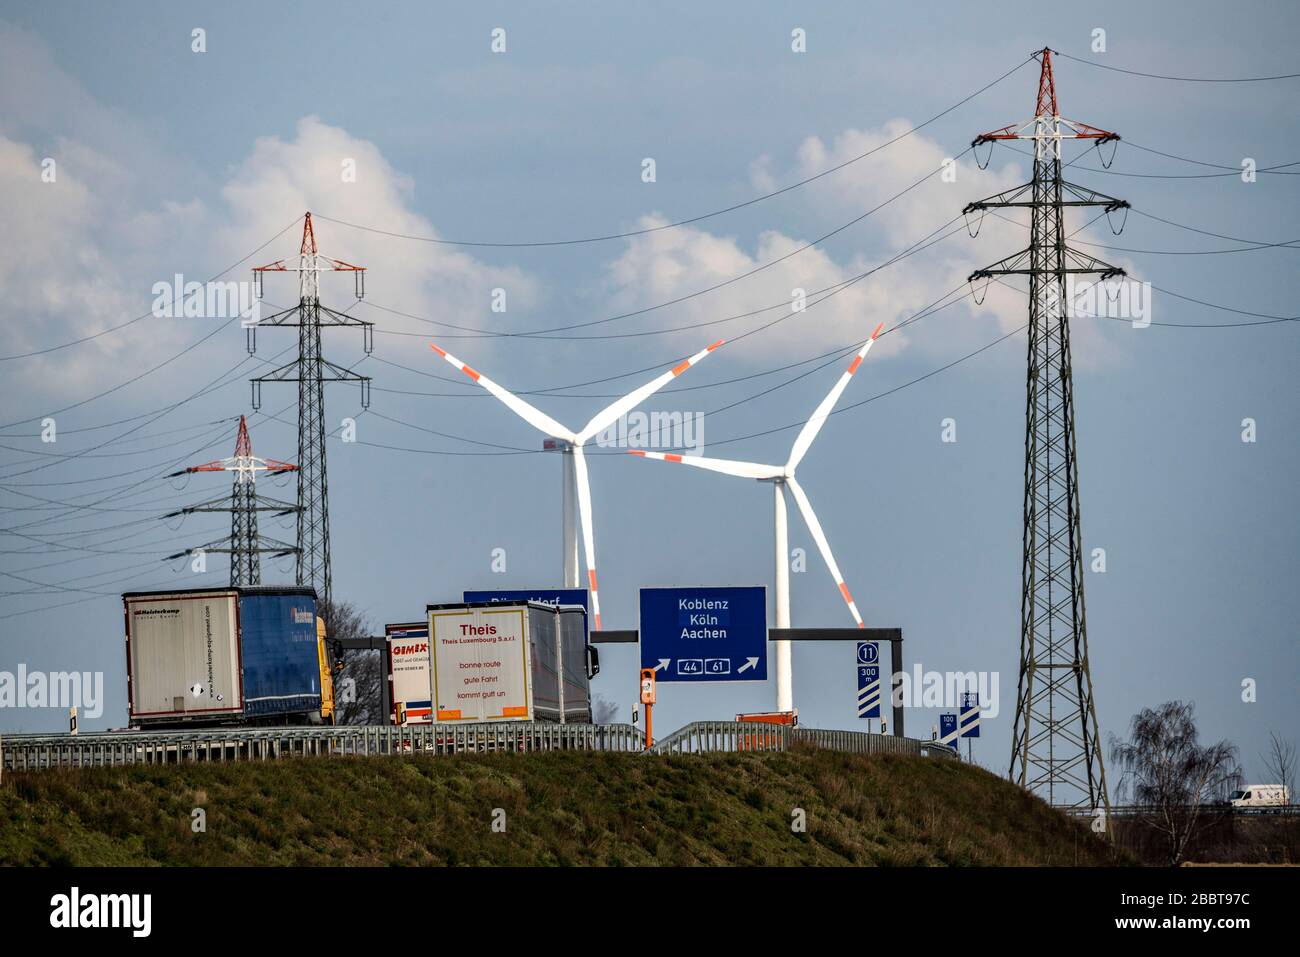 A 46 motorway, Holz motorway junction, access to A44 and A61, wind turbines, high-voltage pylons, near JŸchen, Germany Stock Photo